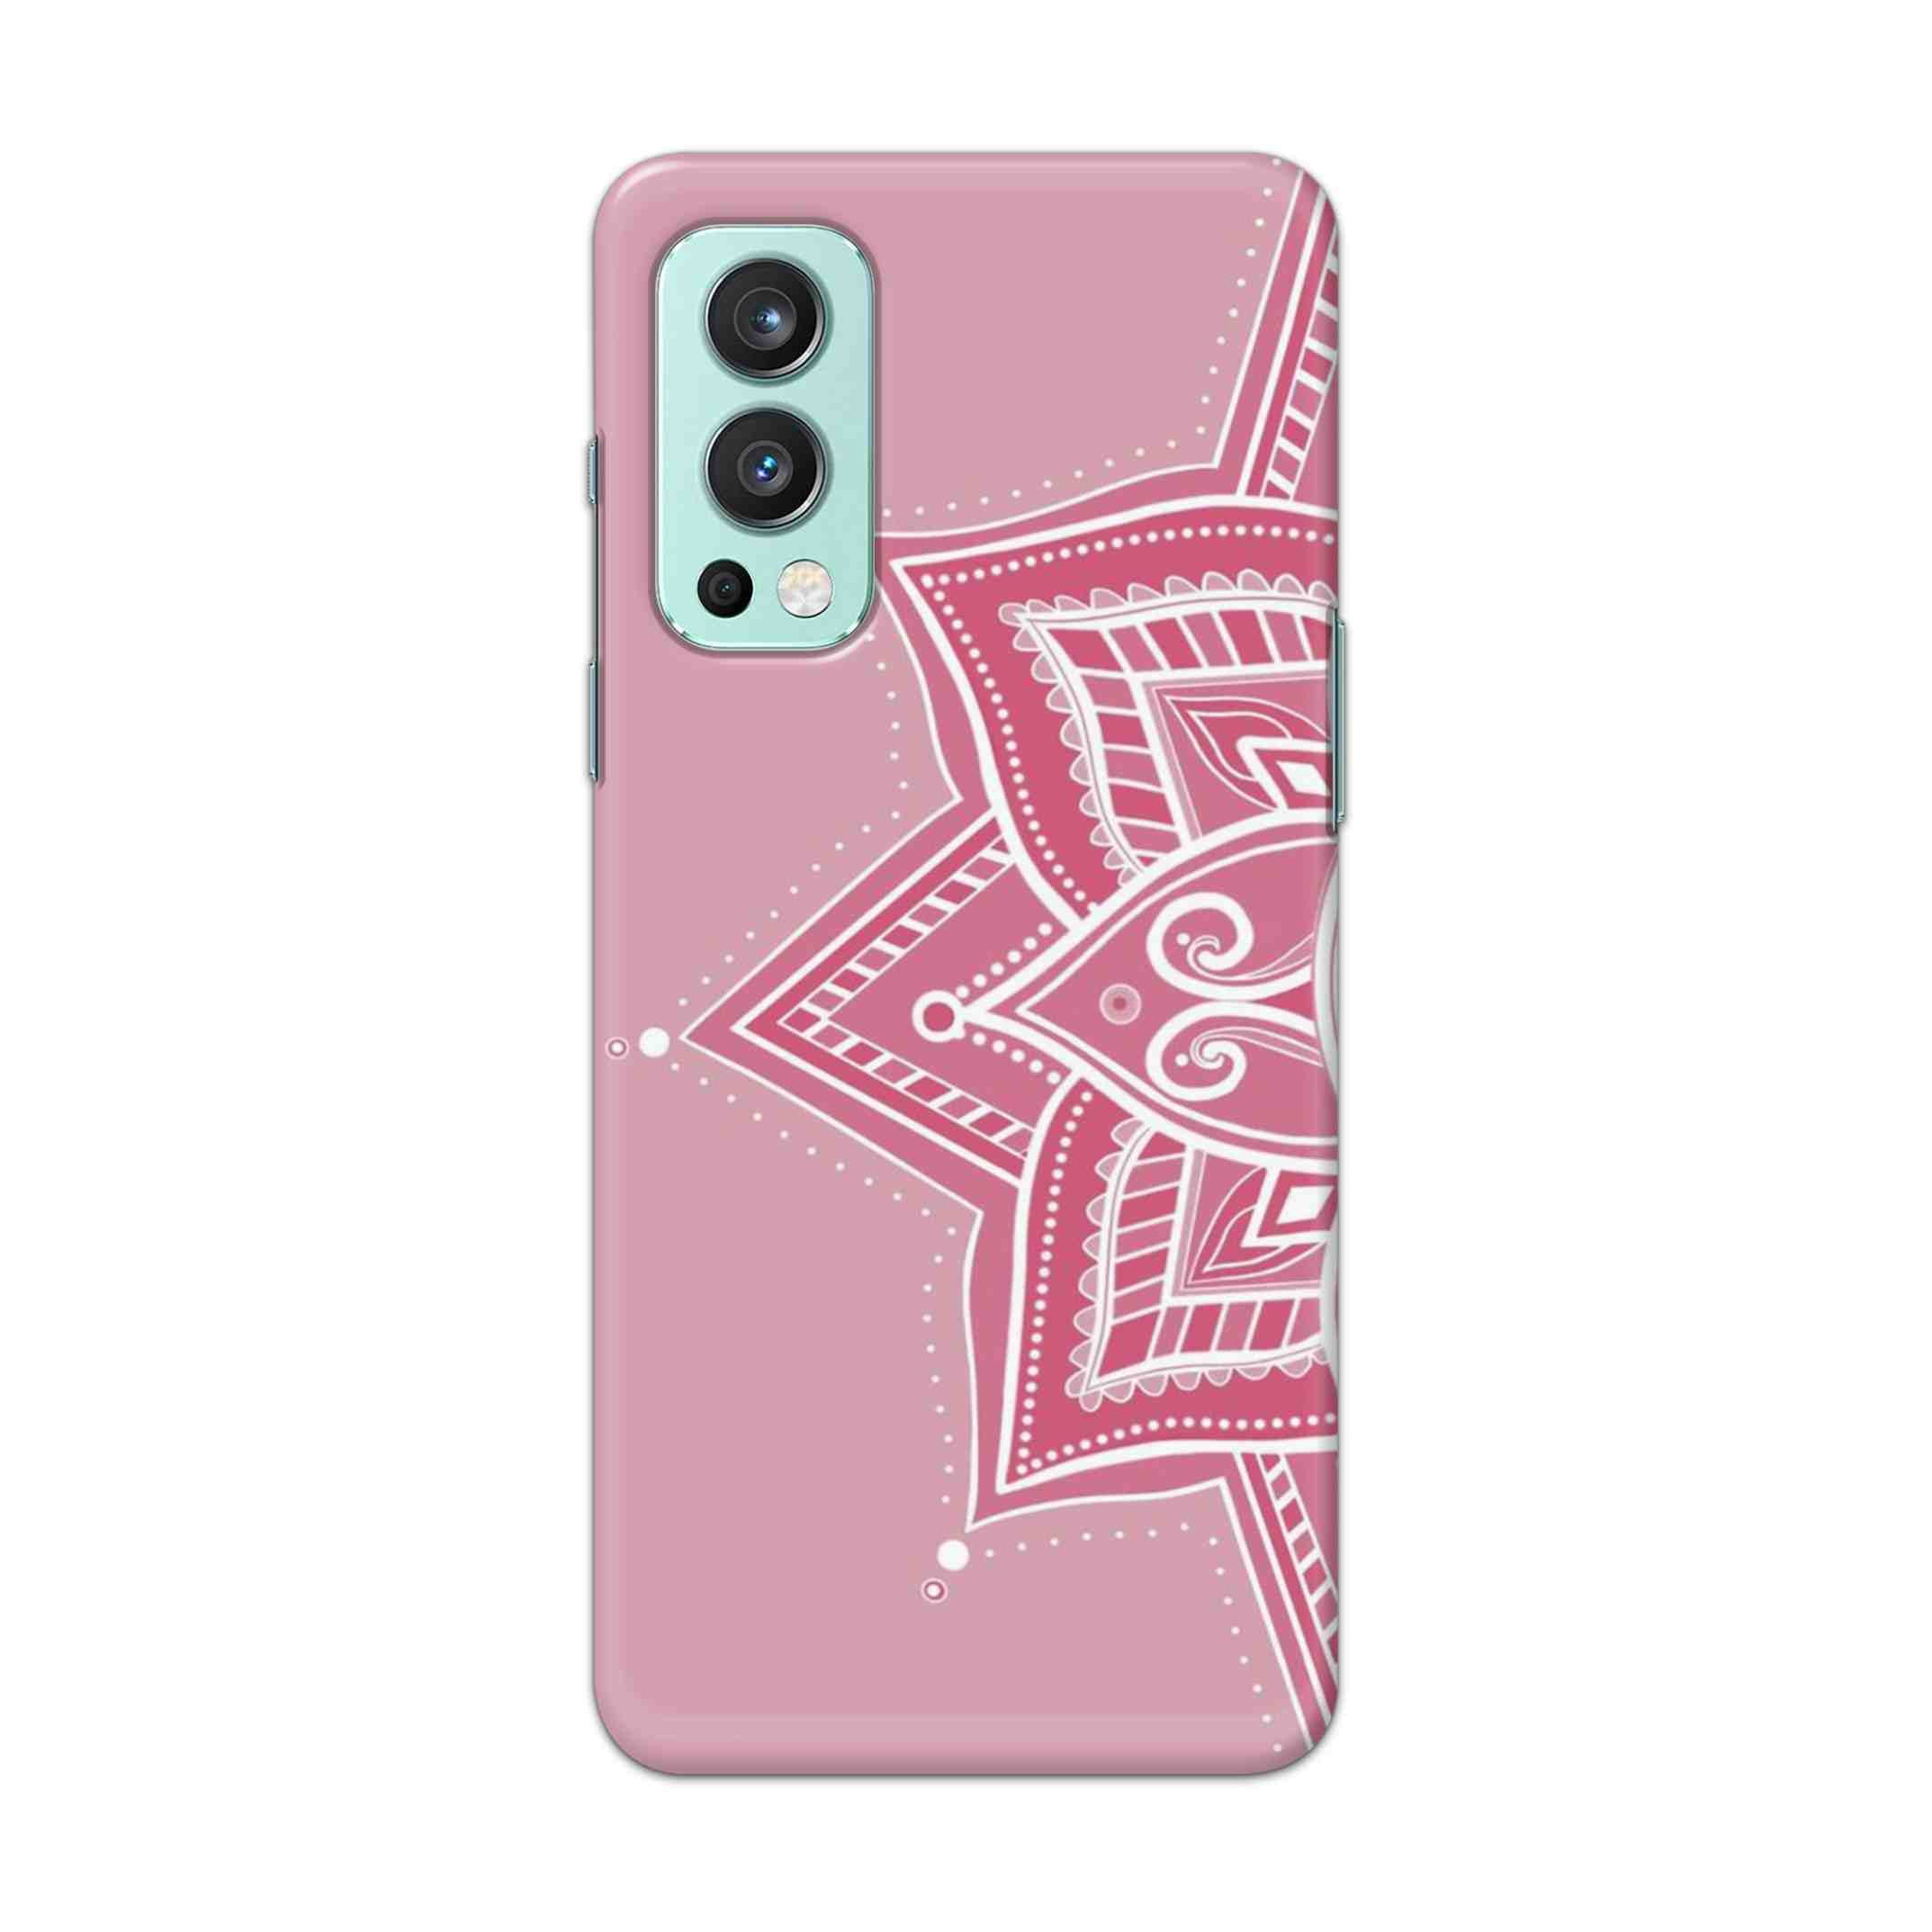 Buy Pink Rangoli Hard Back Mobile Phone Case Cover For OnePlus Nord 2 5G Online